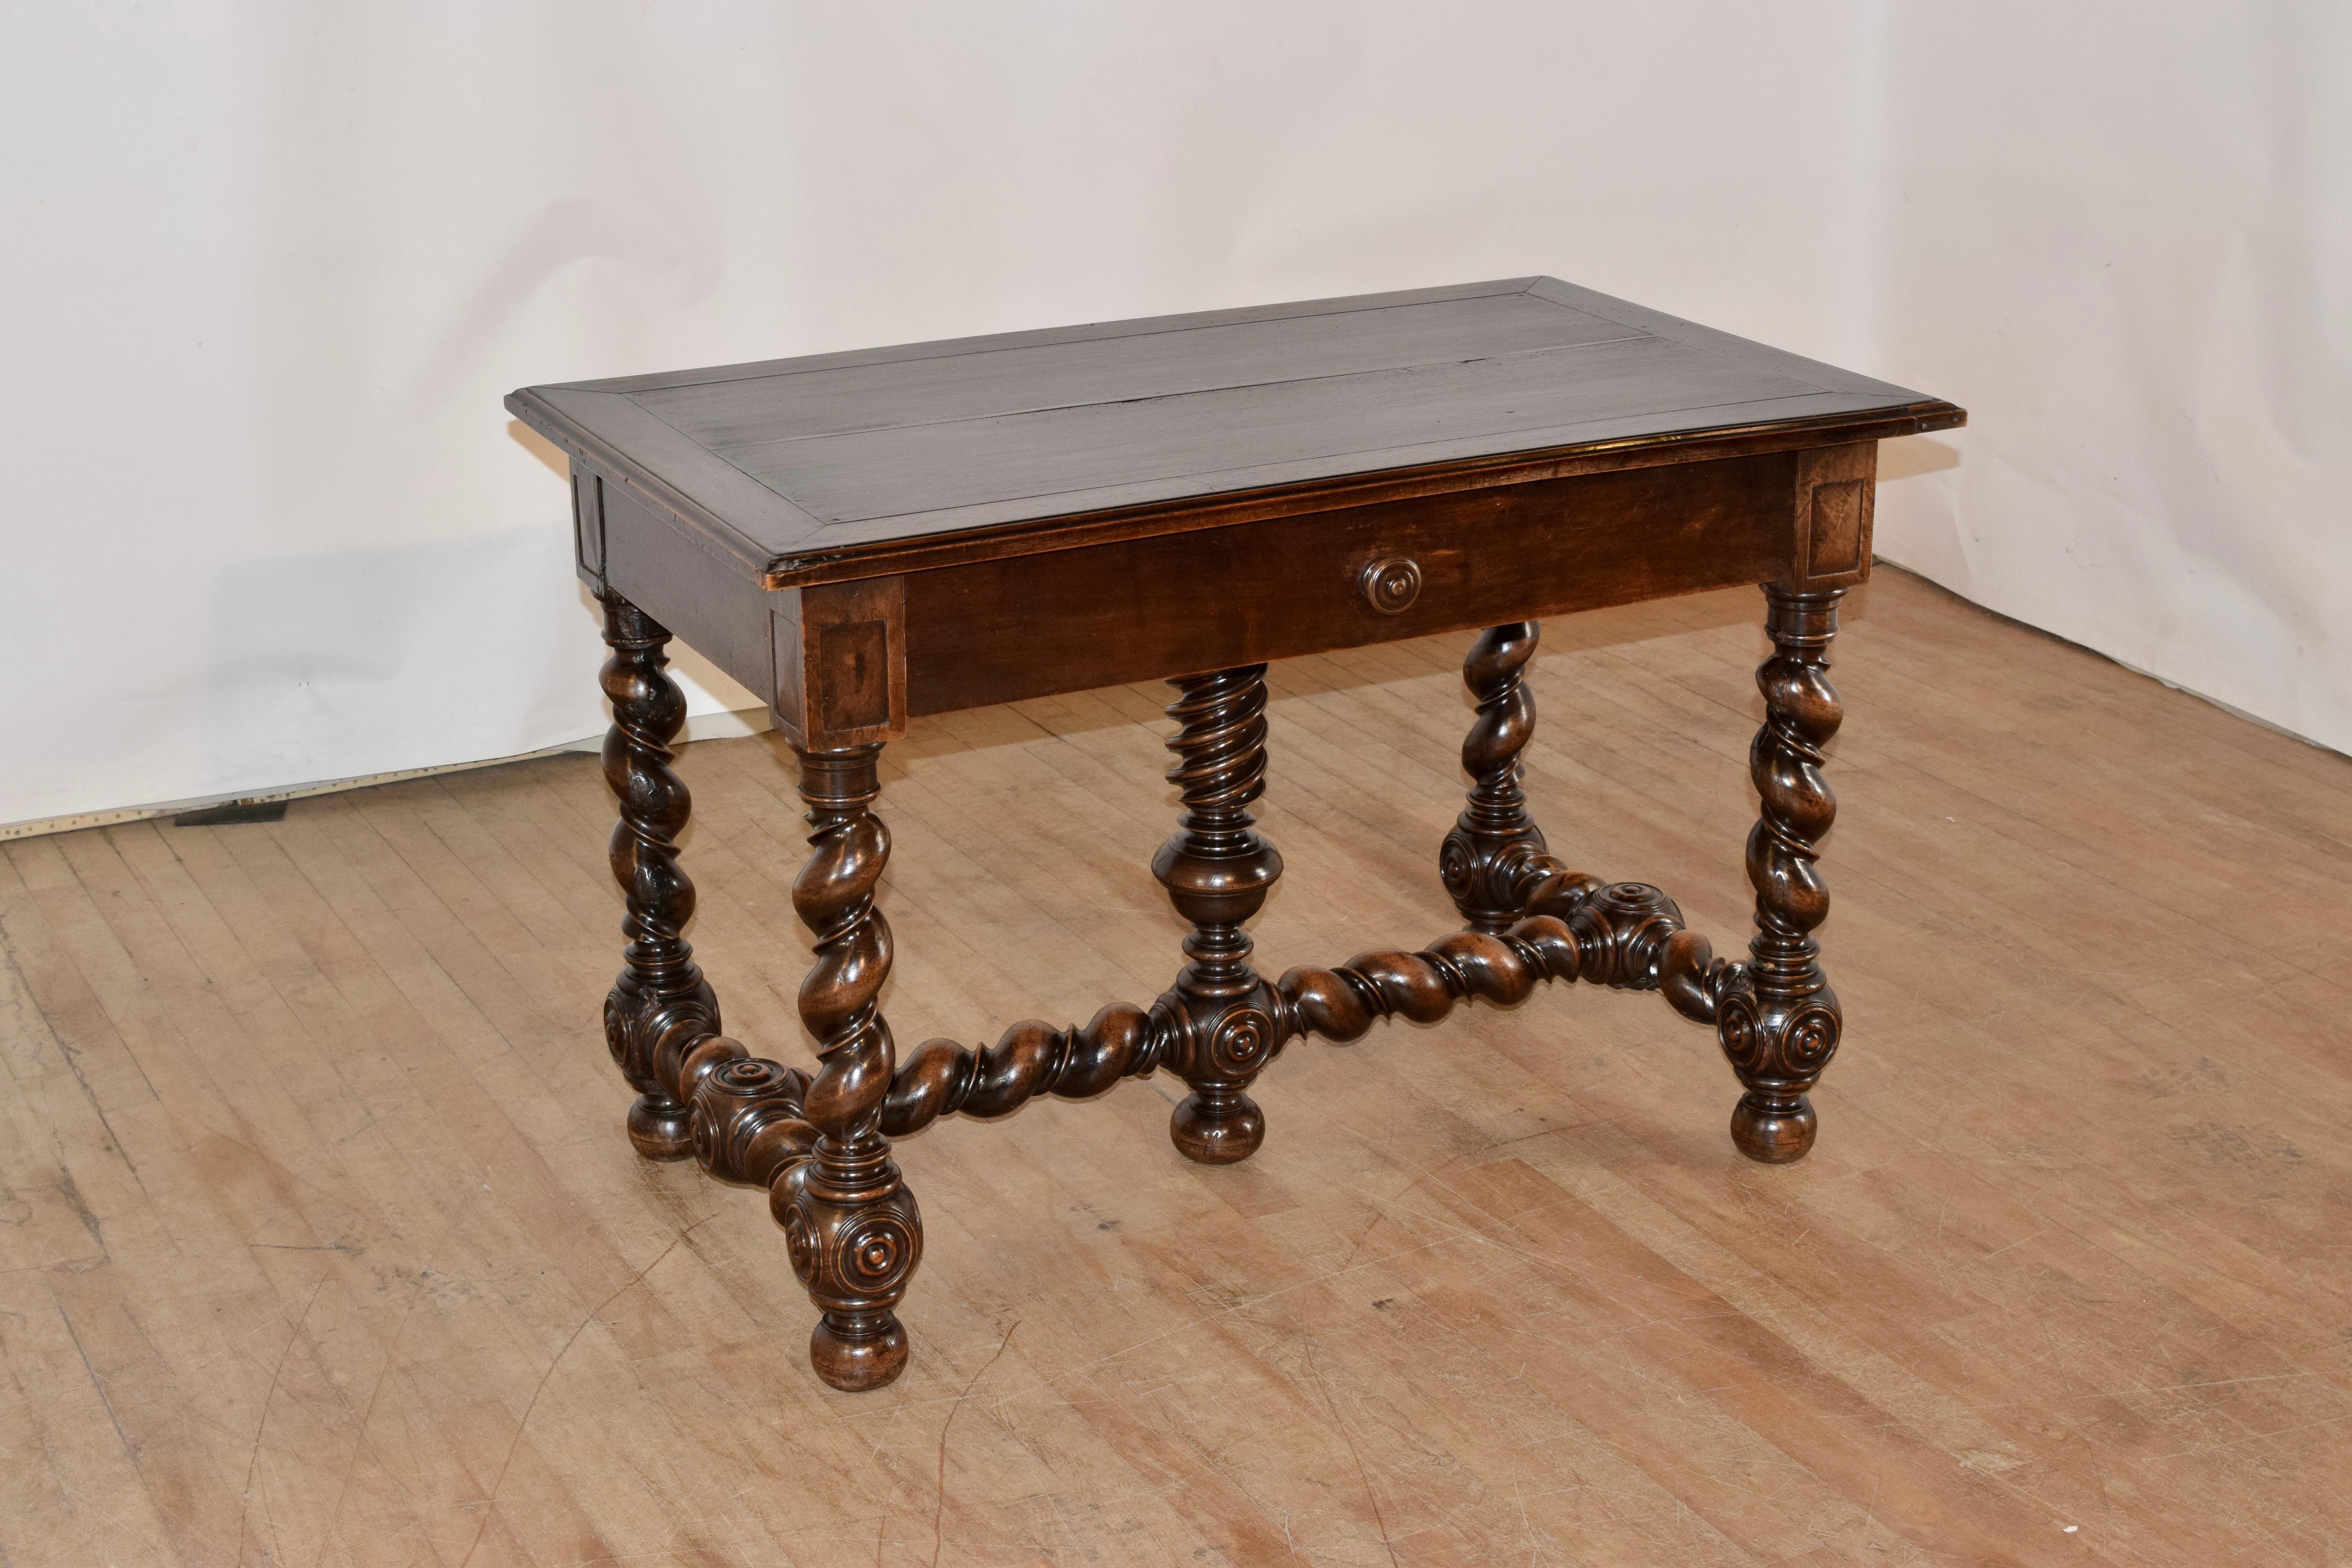 18th century walnut library table from France. The top is made from two planks and is banded with a beveled edge, following down to a simple apron, which contains a single drawer in the front. The table is supported on hand turned barley and vine